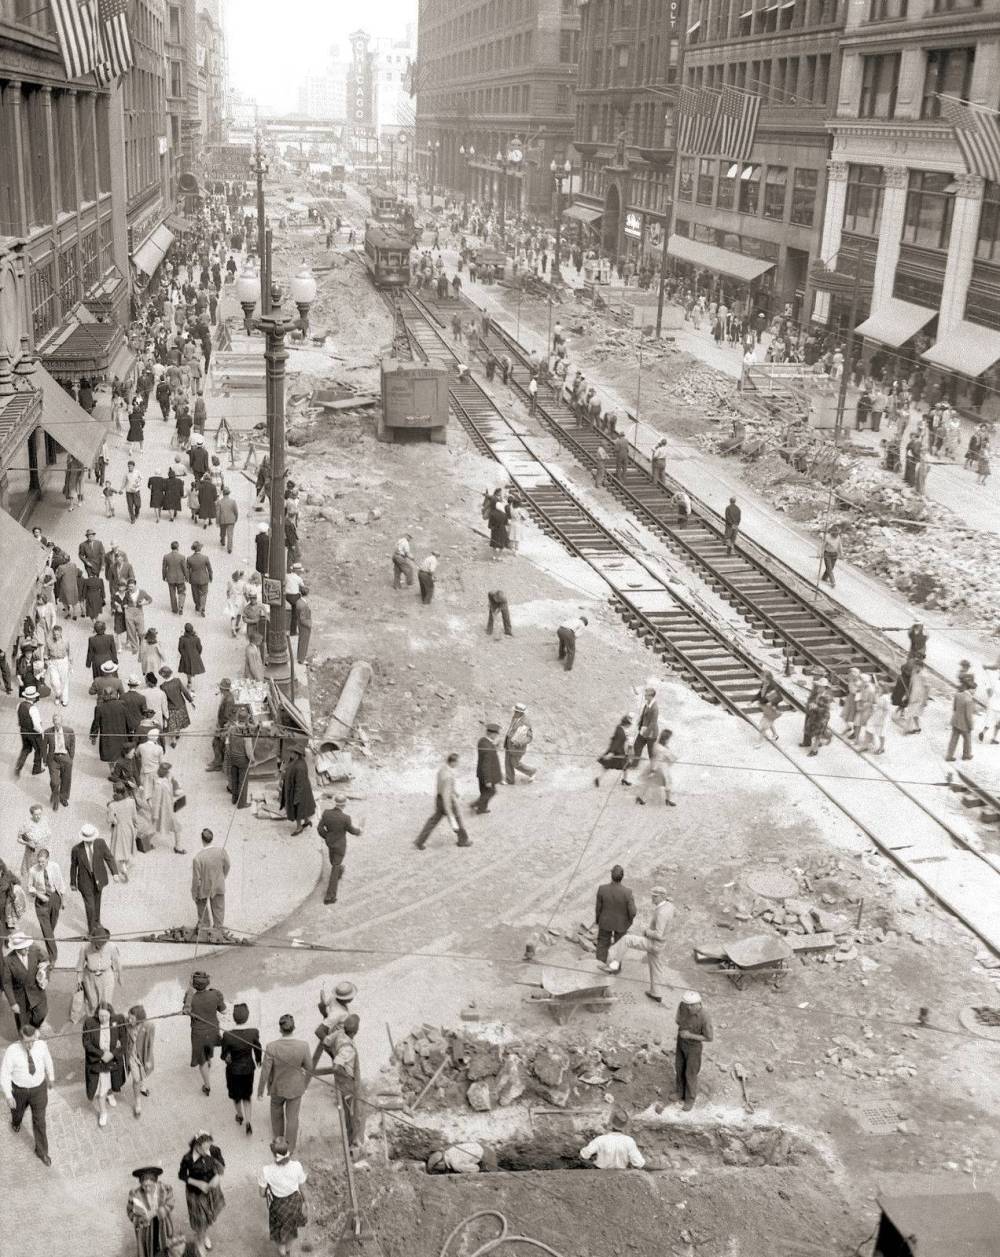 PHOTO - CHICAGO - STATE STREET - CONSTRUCTION OF SUBWAY - CROWDS - TEMPORARY STREETCAR TRACKS - AERIAL - EARLY 1940s